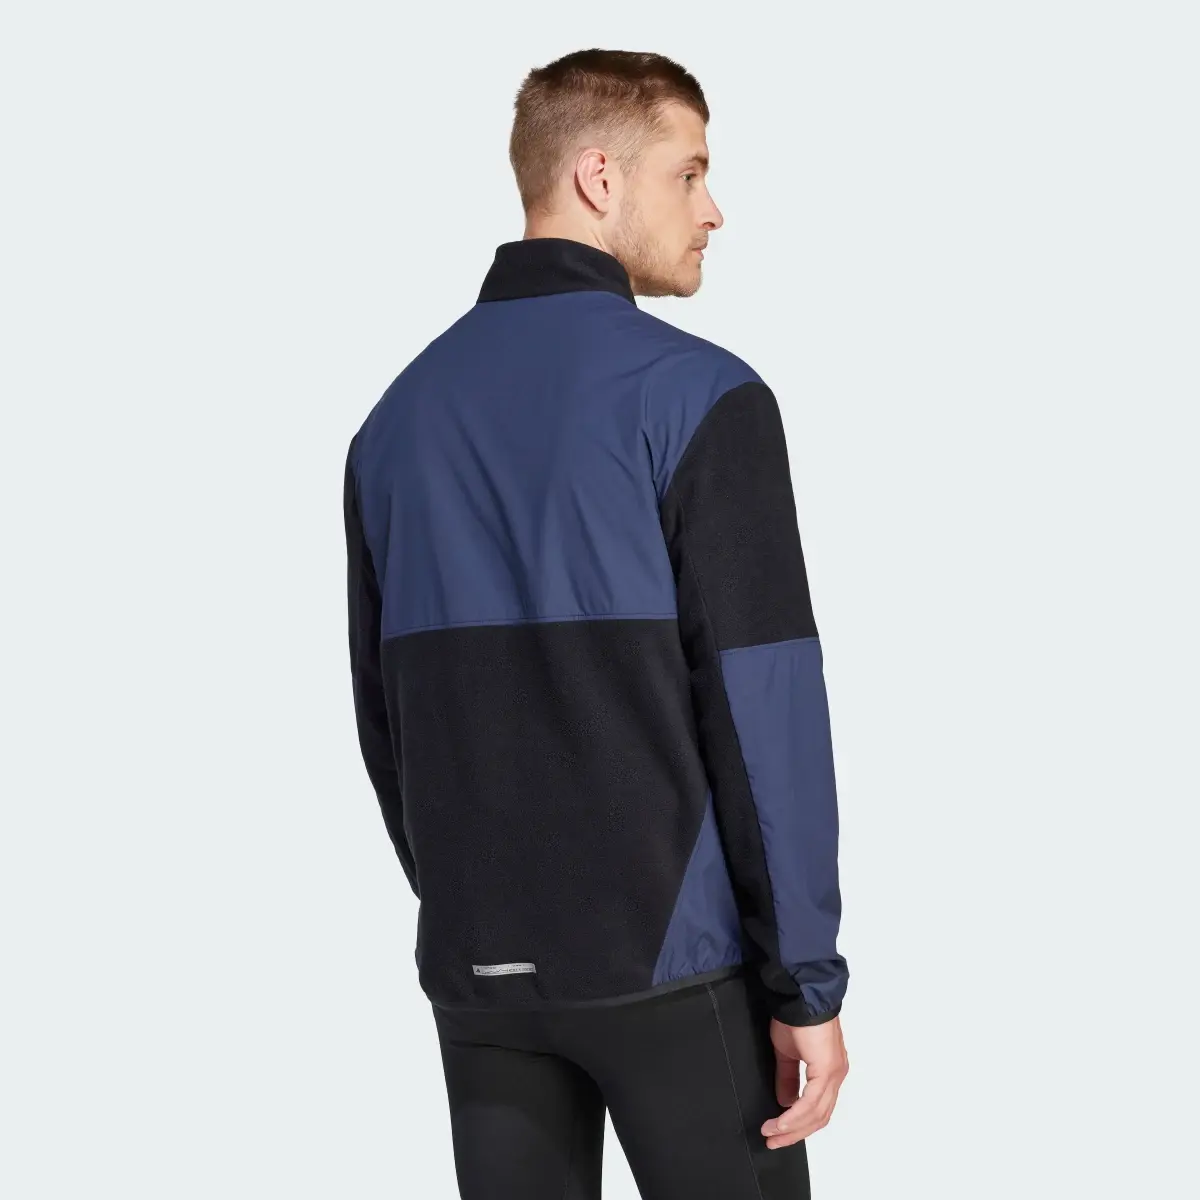 Adidas Ultimate Running Conquer the Elements Jacket. 3